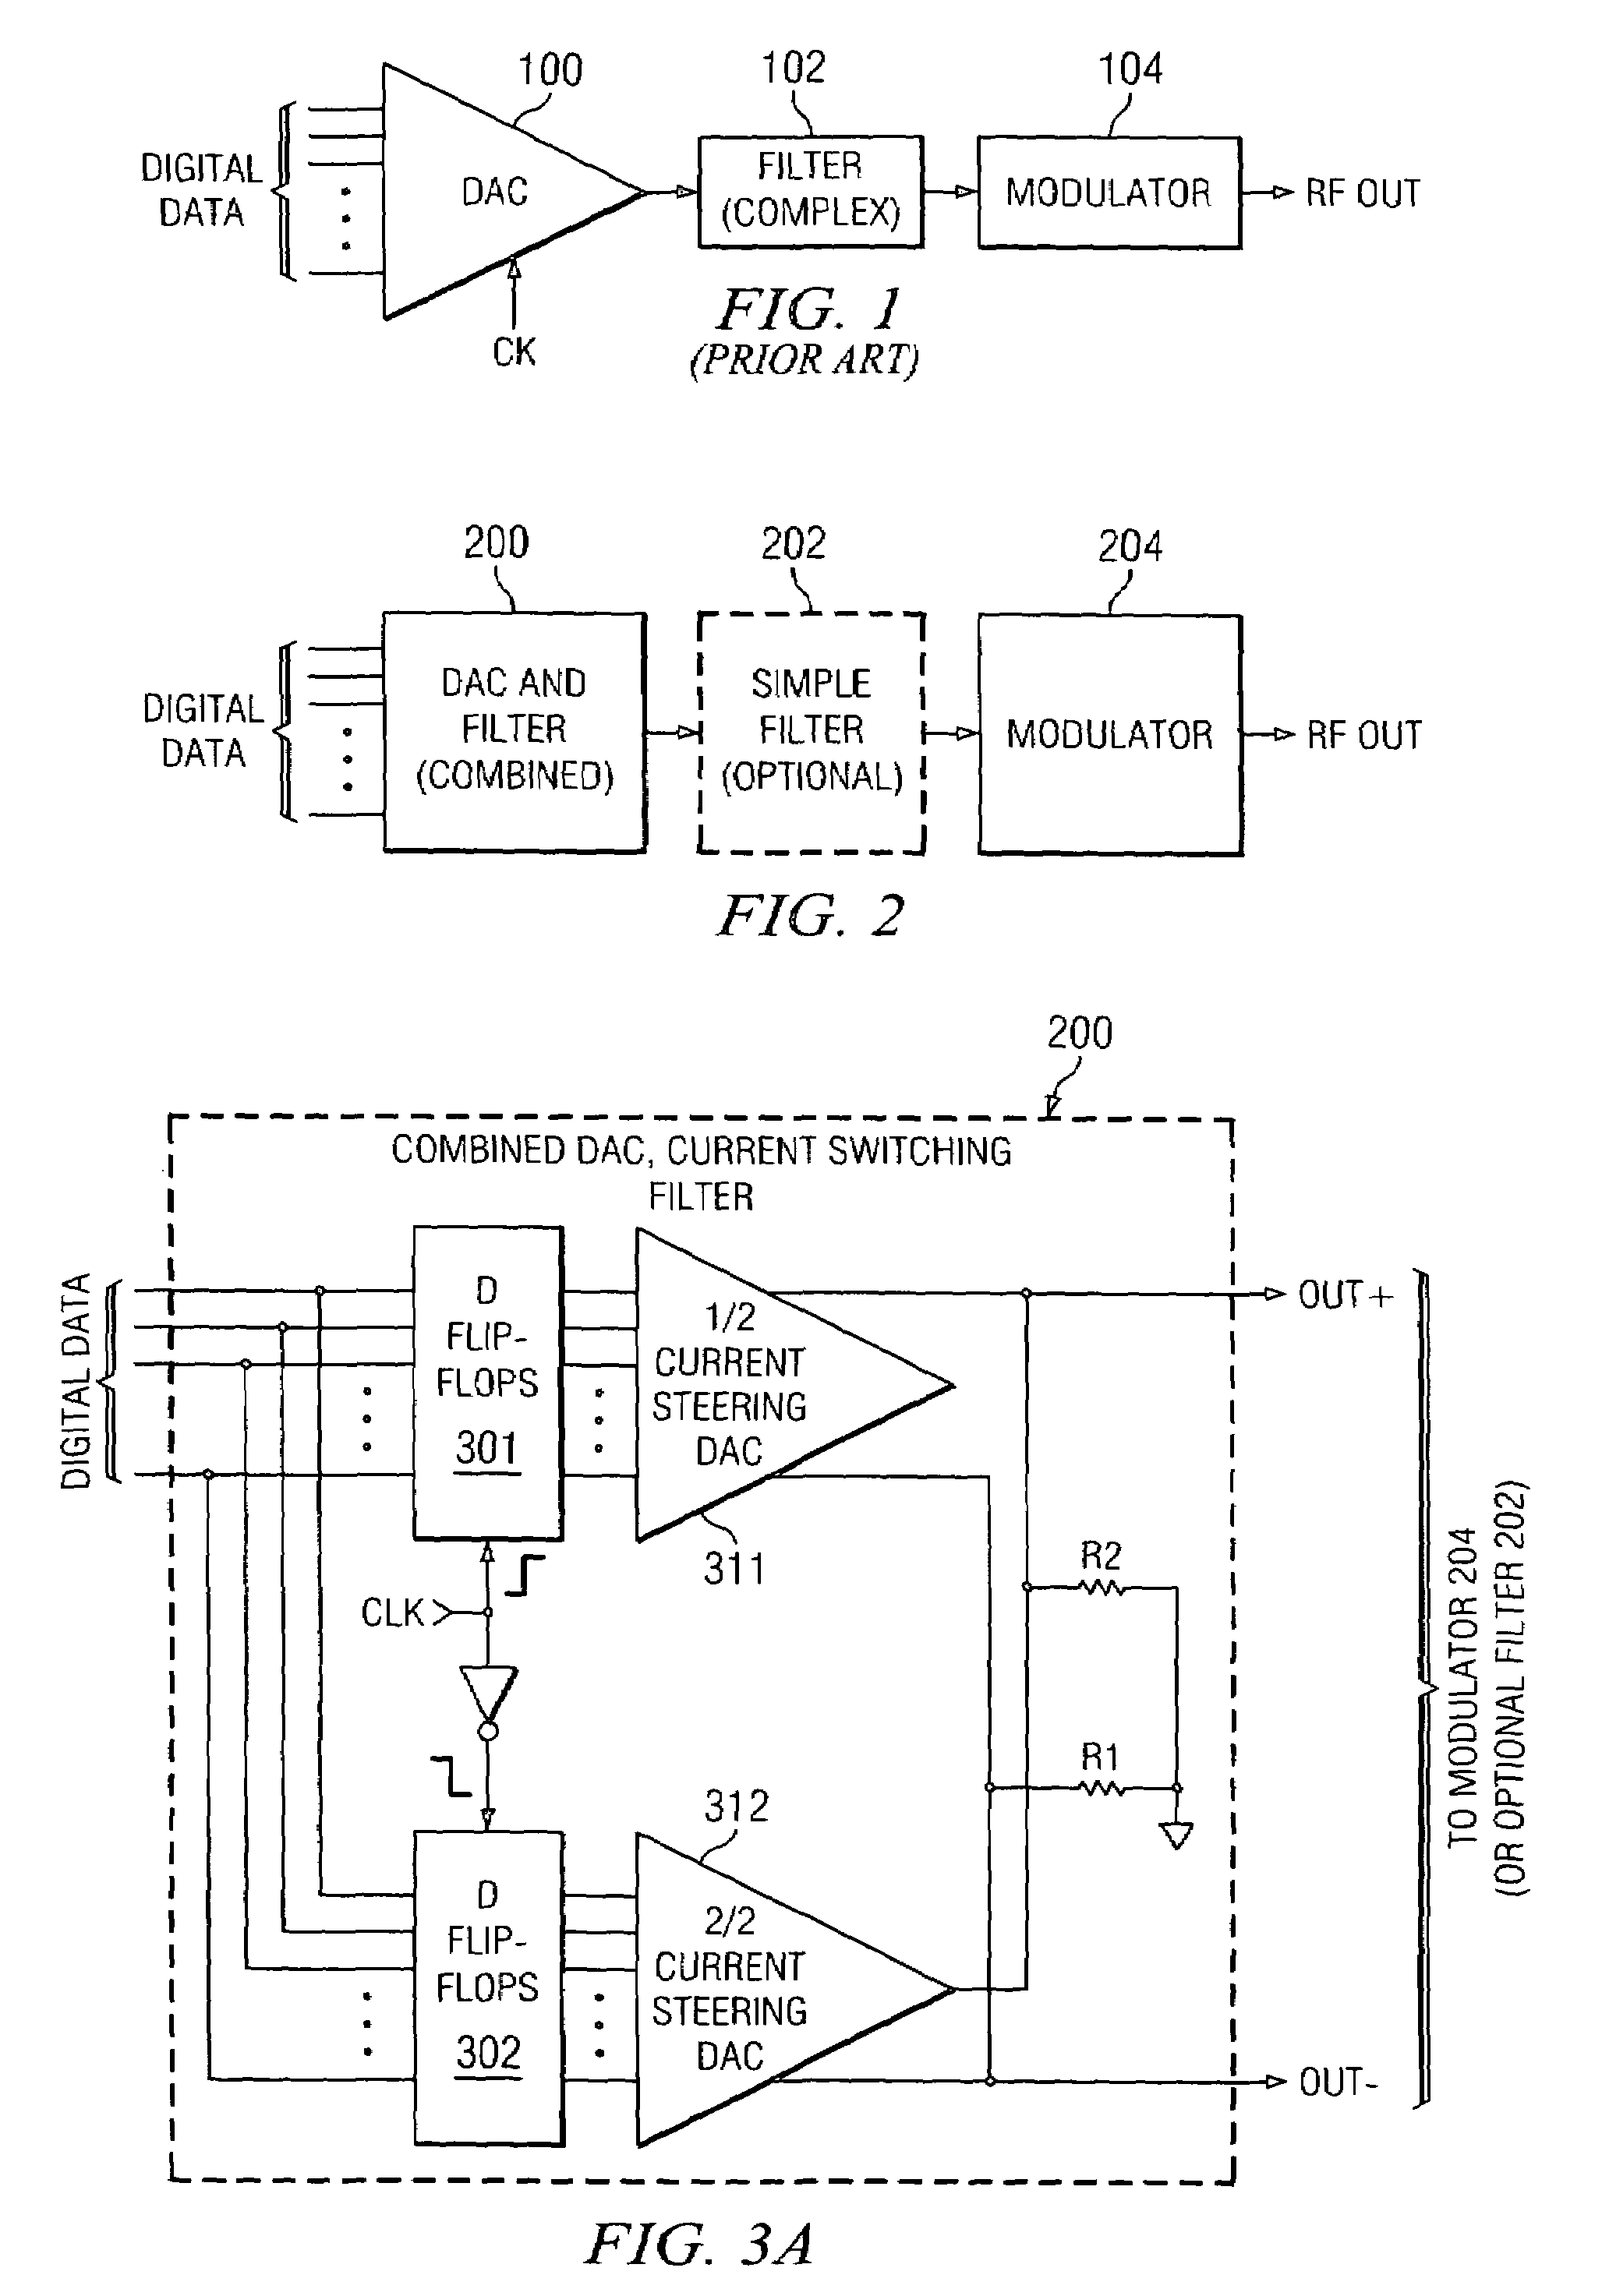 Current switching arrangement for D.A.C. reconstruction filtering